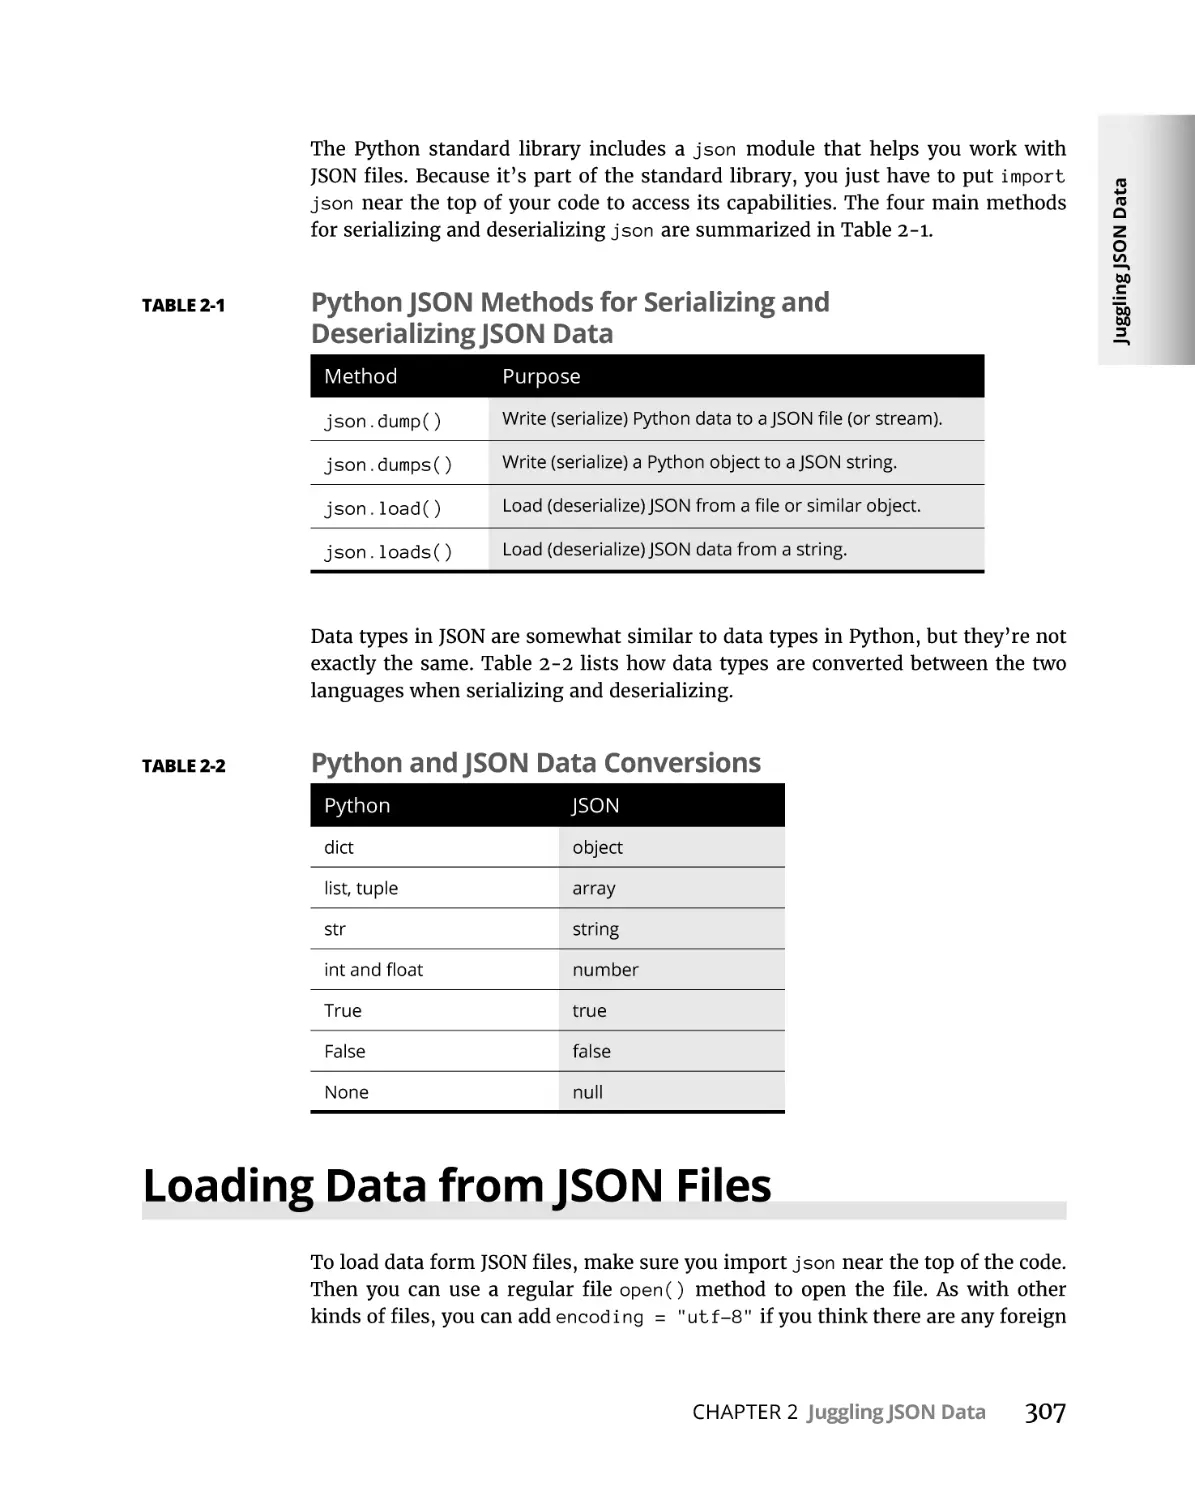 Loading Data from JSON Files